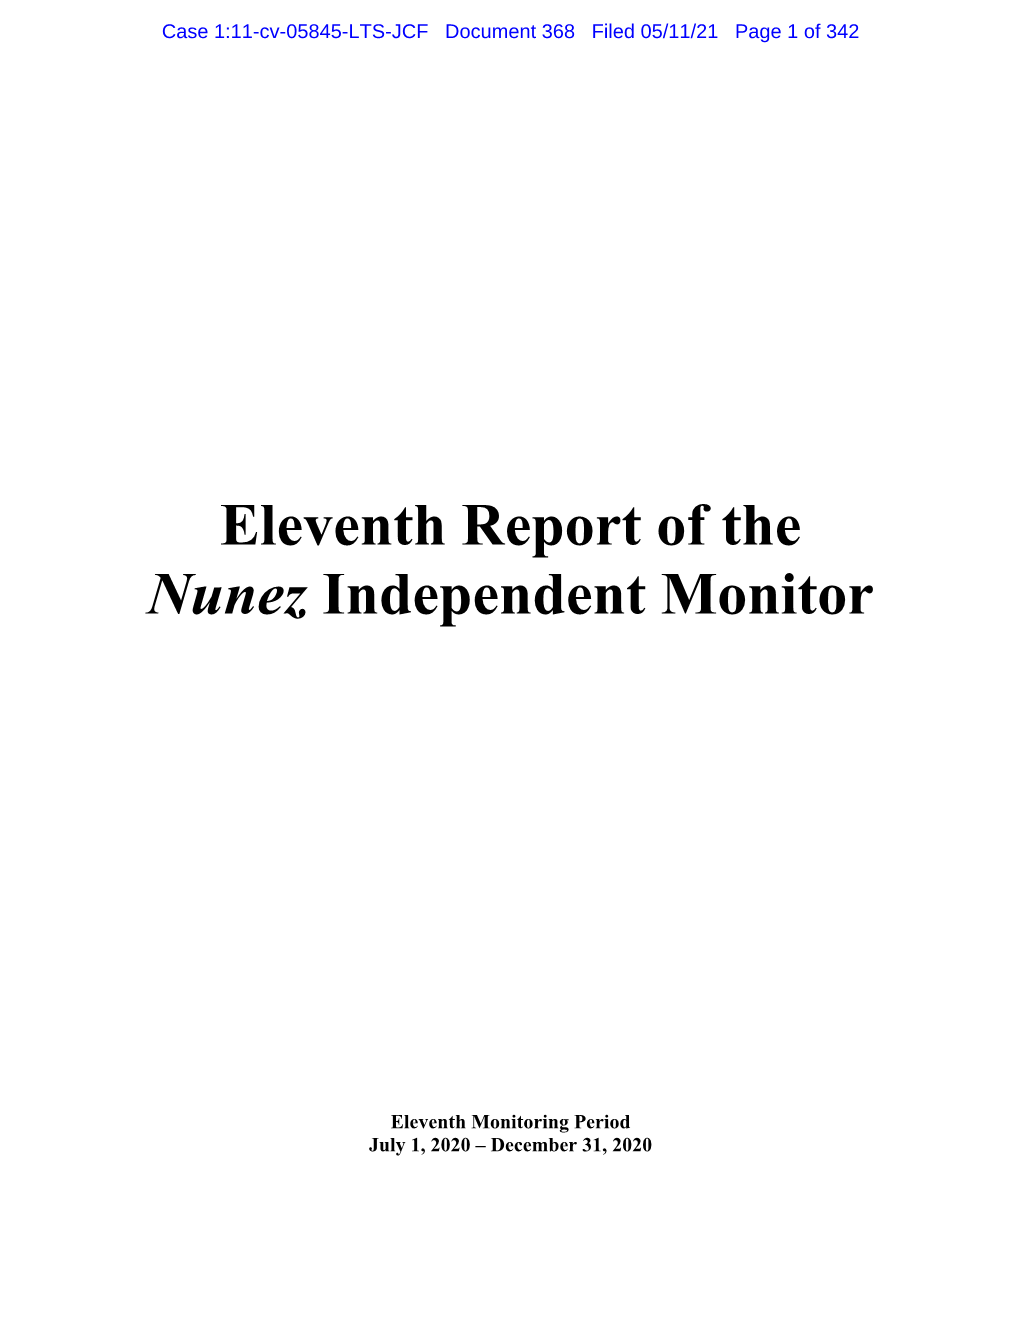 Eleventh Report of the Nunez Independent Monitor